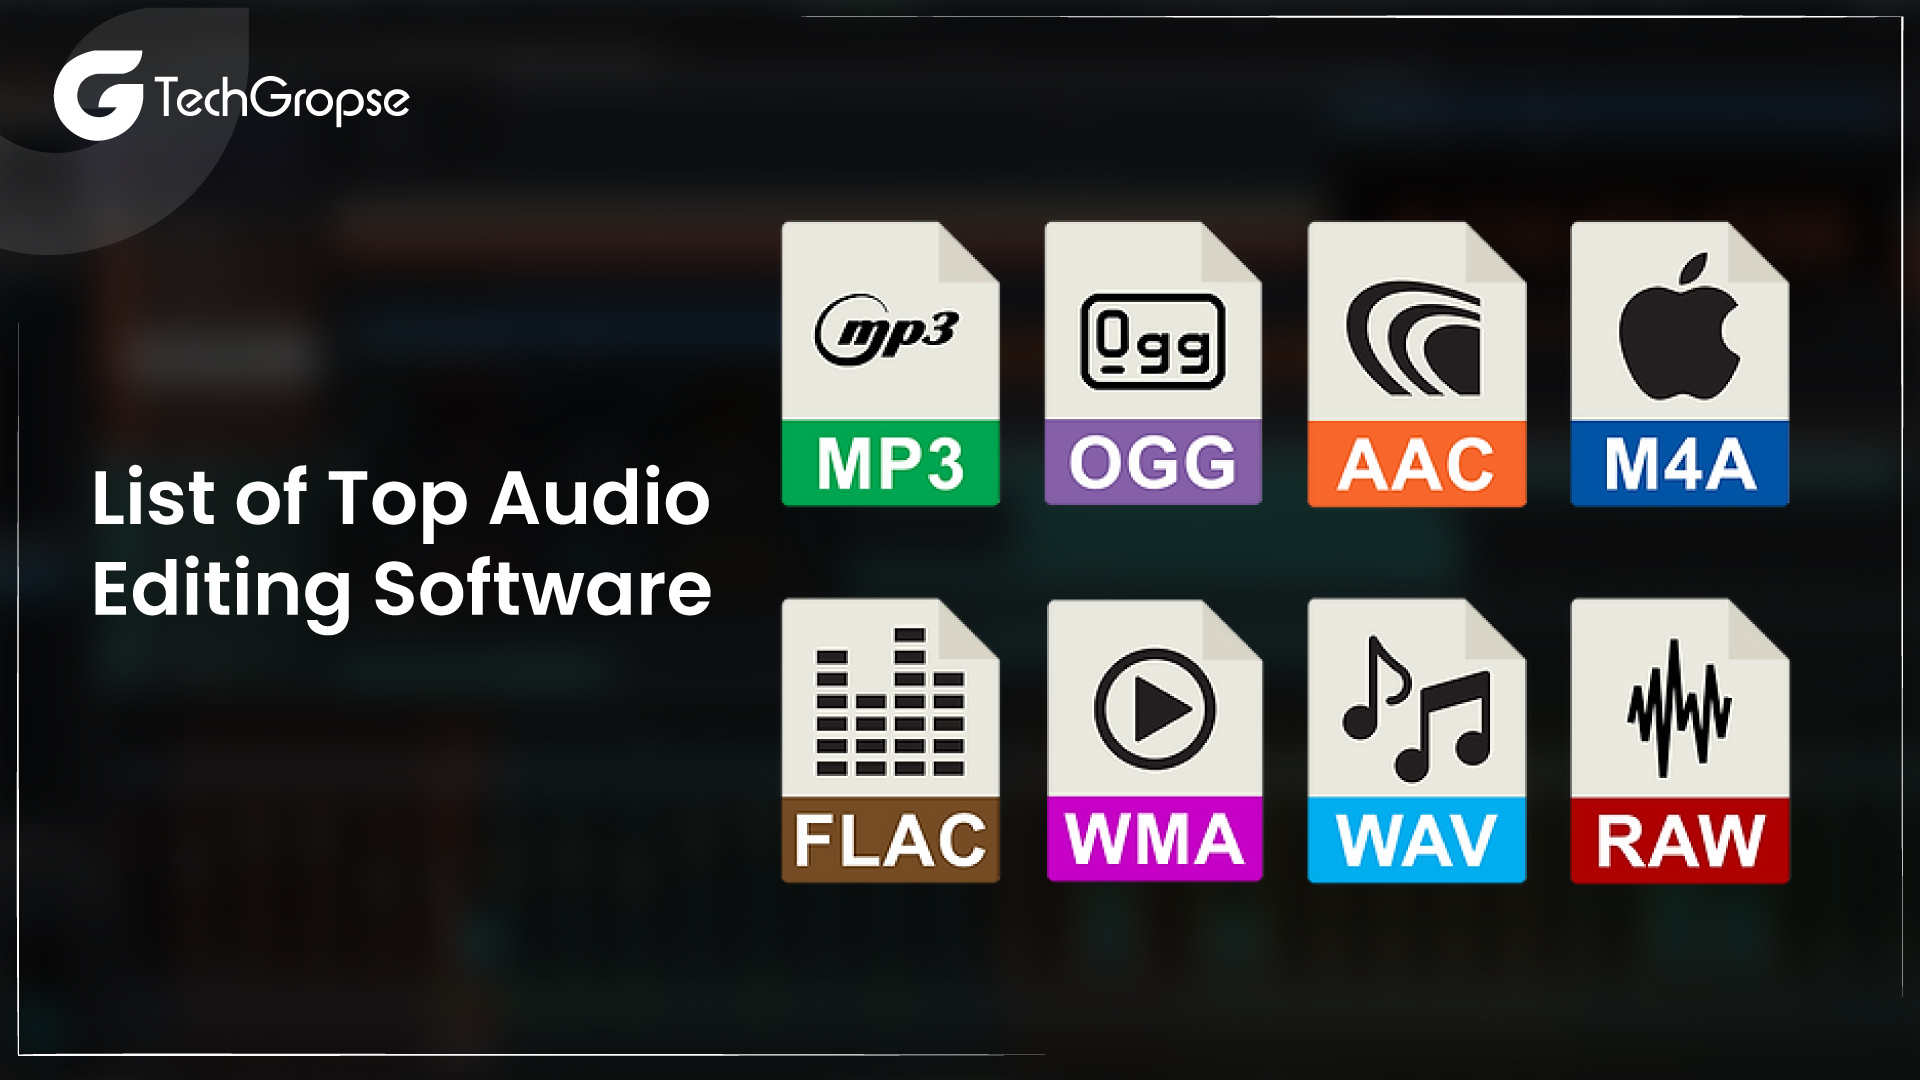 List of Top Audio Editing Software